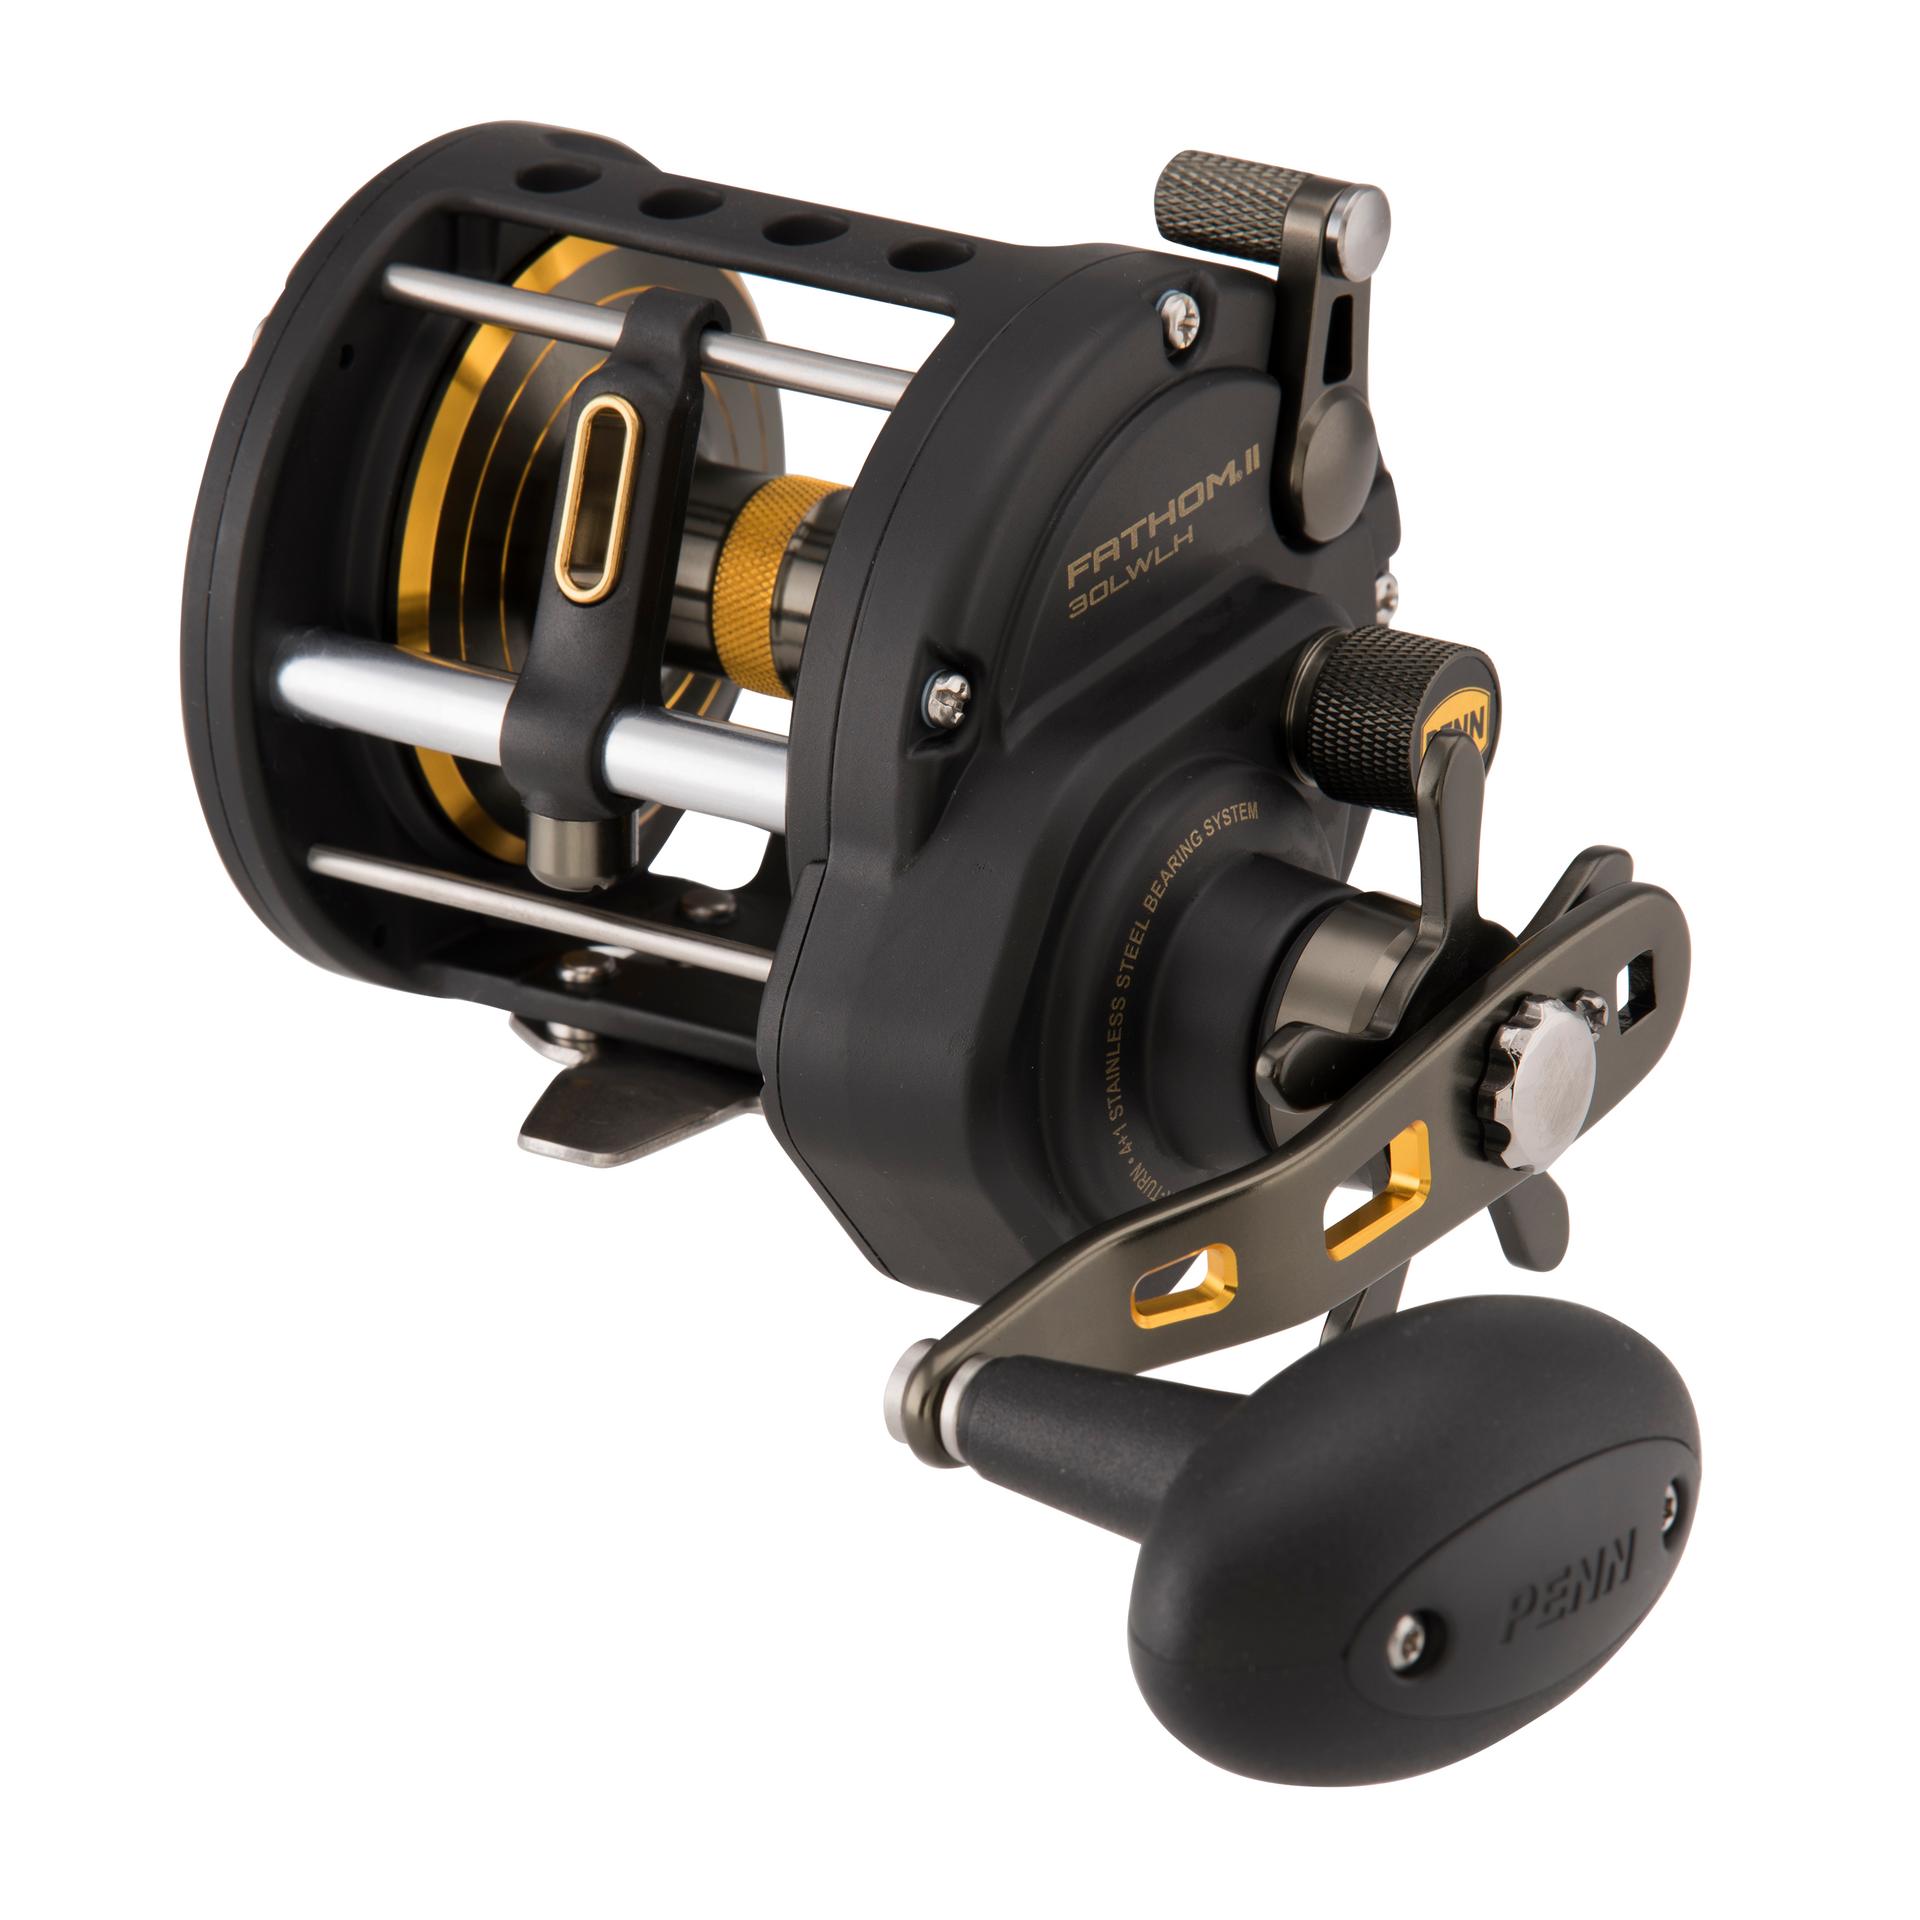 Unboxing a Penn Fathom II Multiplier / Conventional Casting Fishing Reel UK  / US Sea Angling 